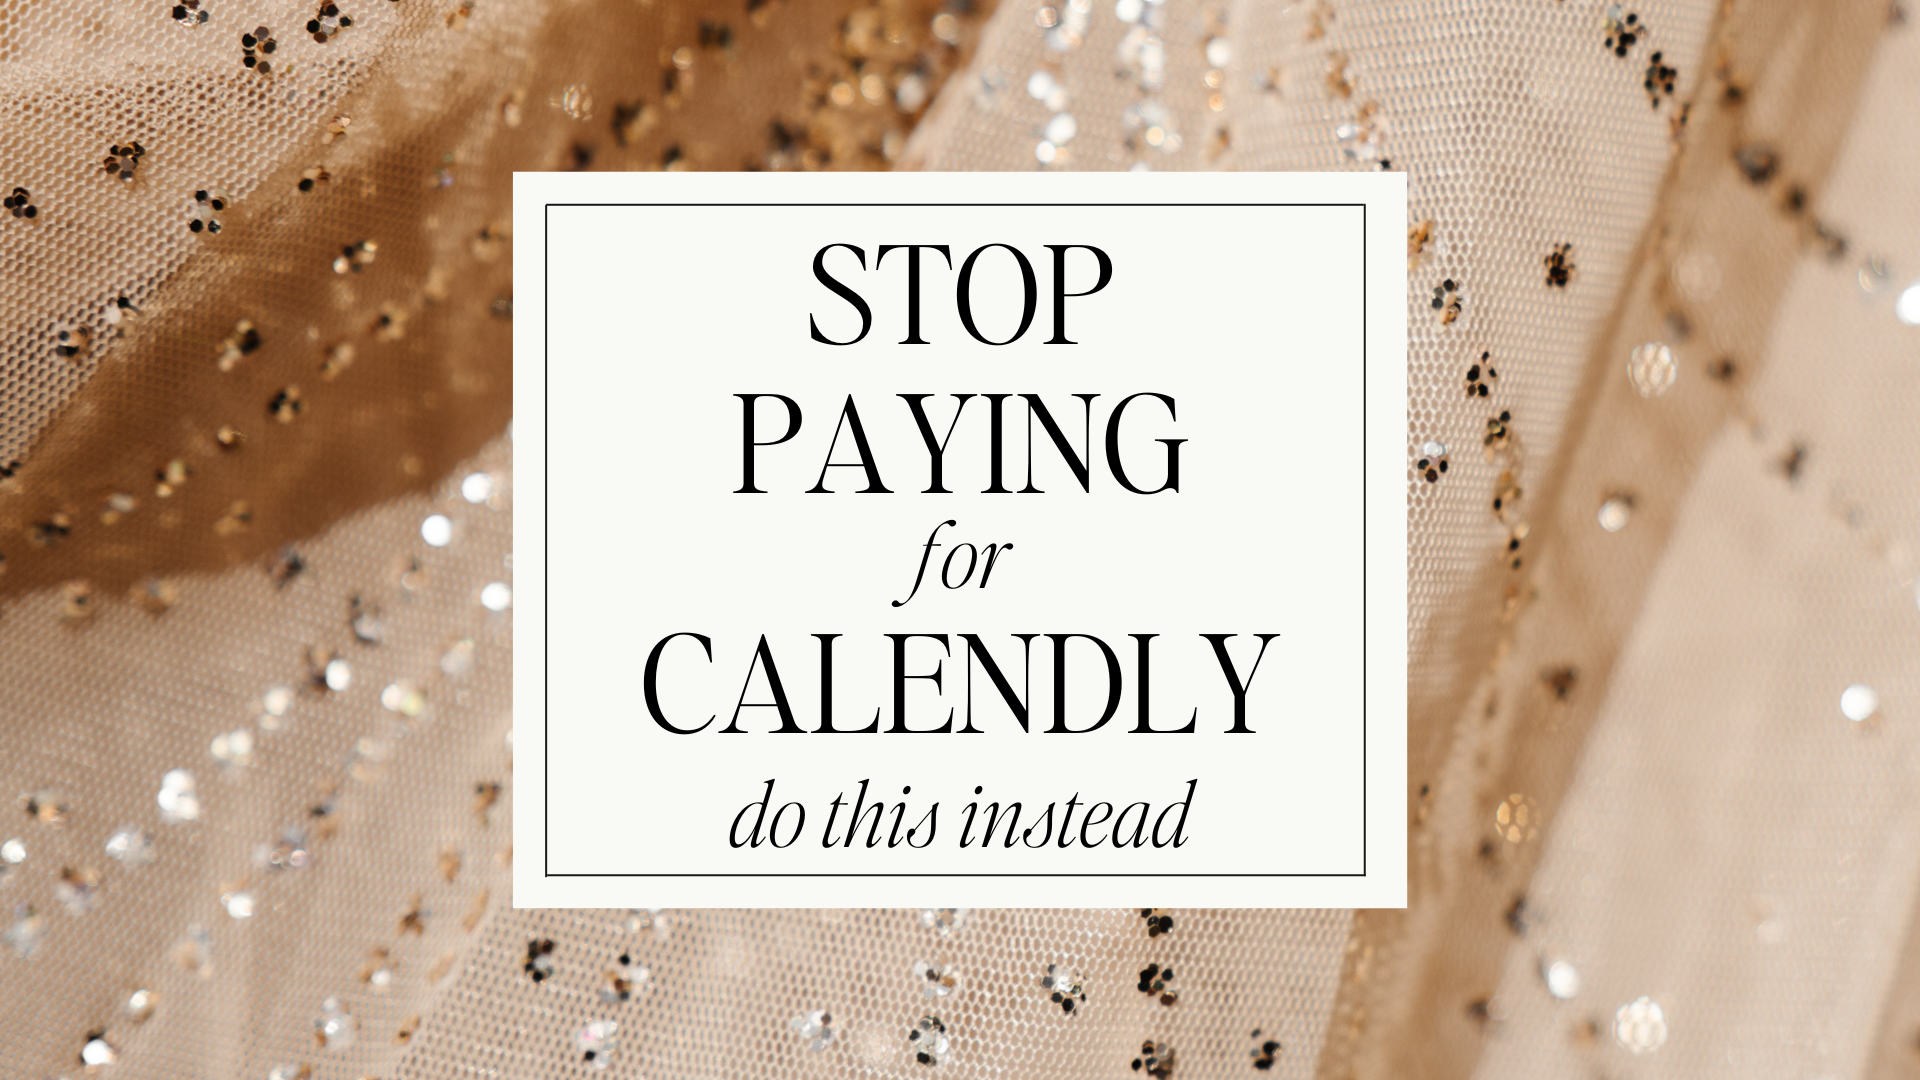 Stop Paying for Calendly - do this instead!